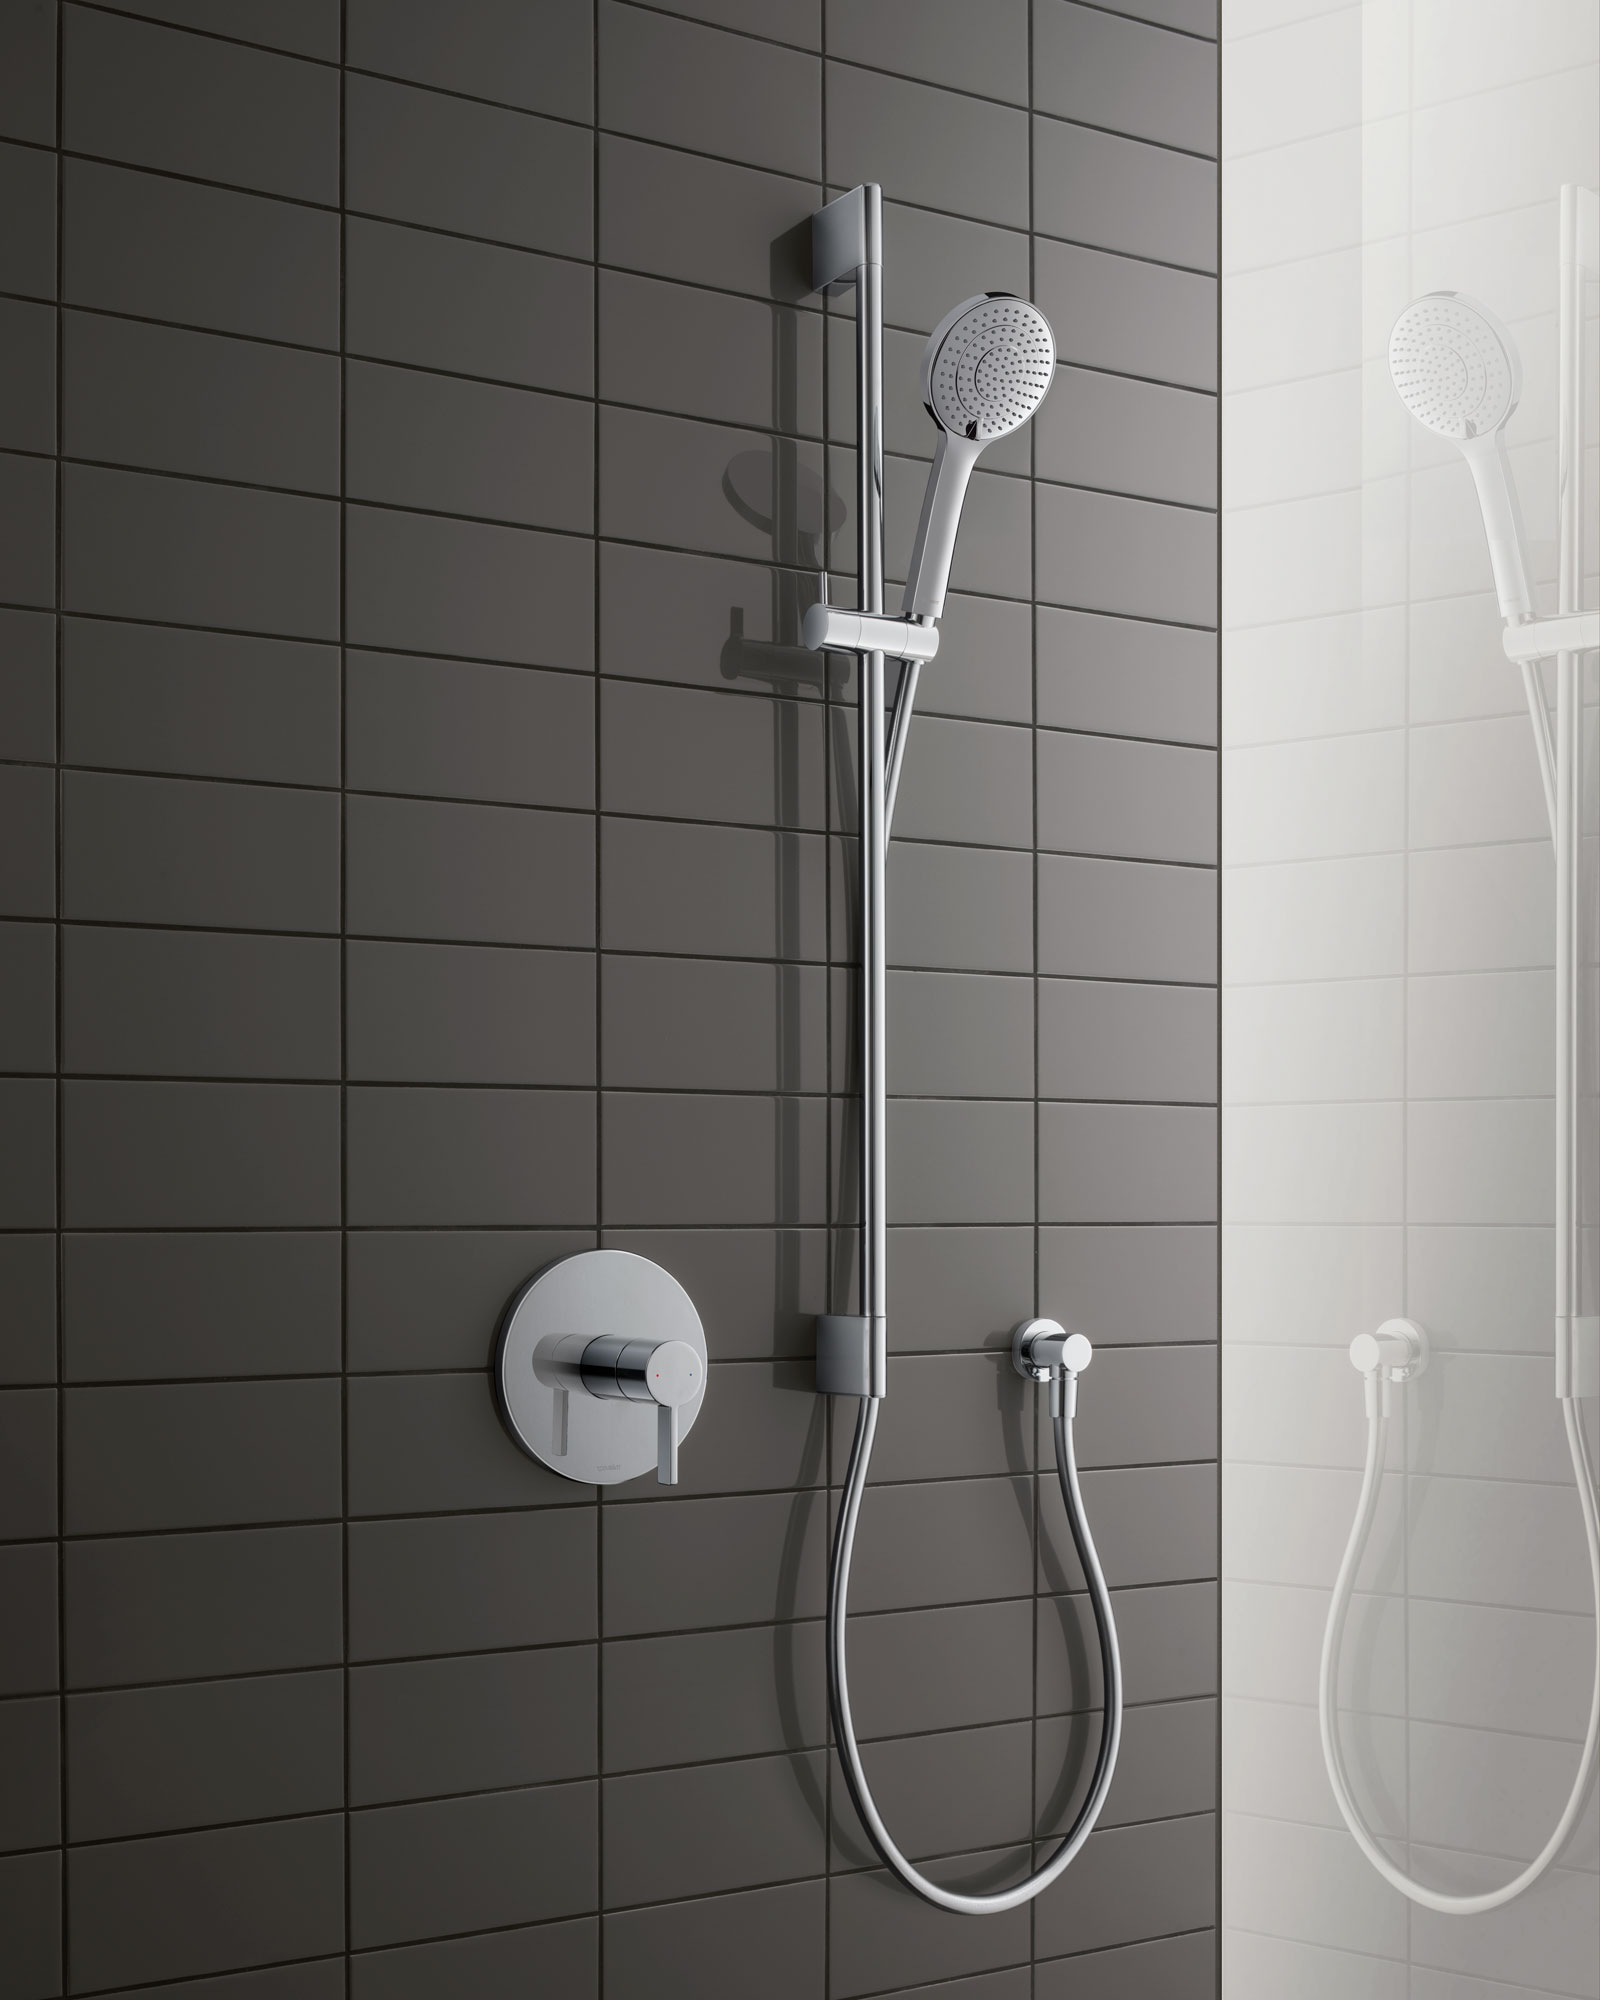 D-Neo shower faucets
